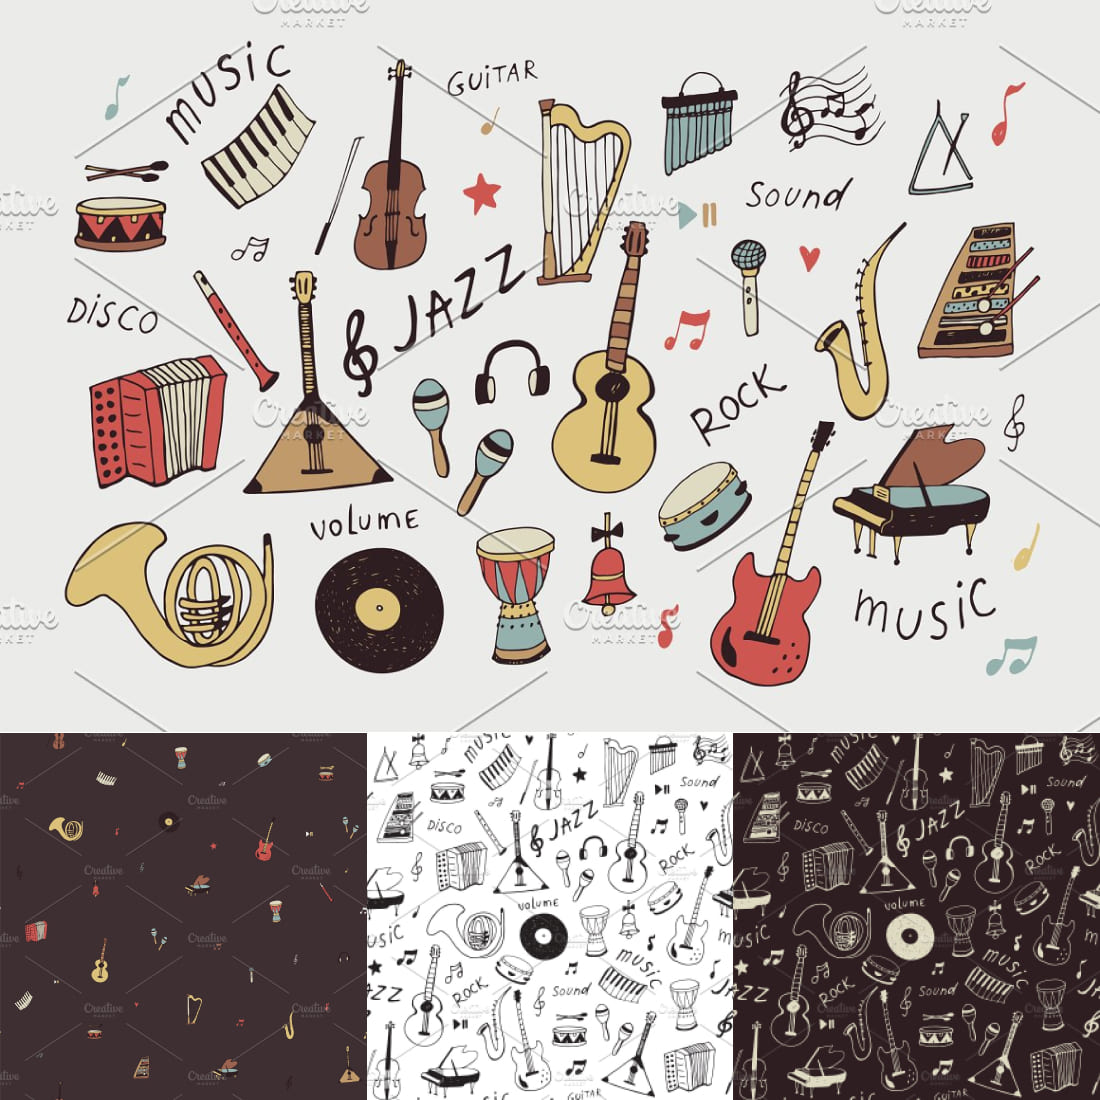 Musical Instruments cover.